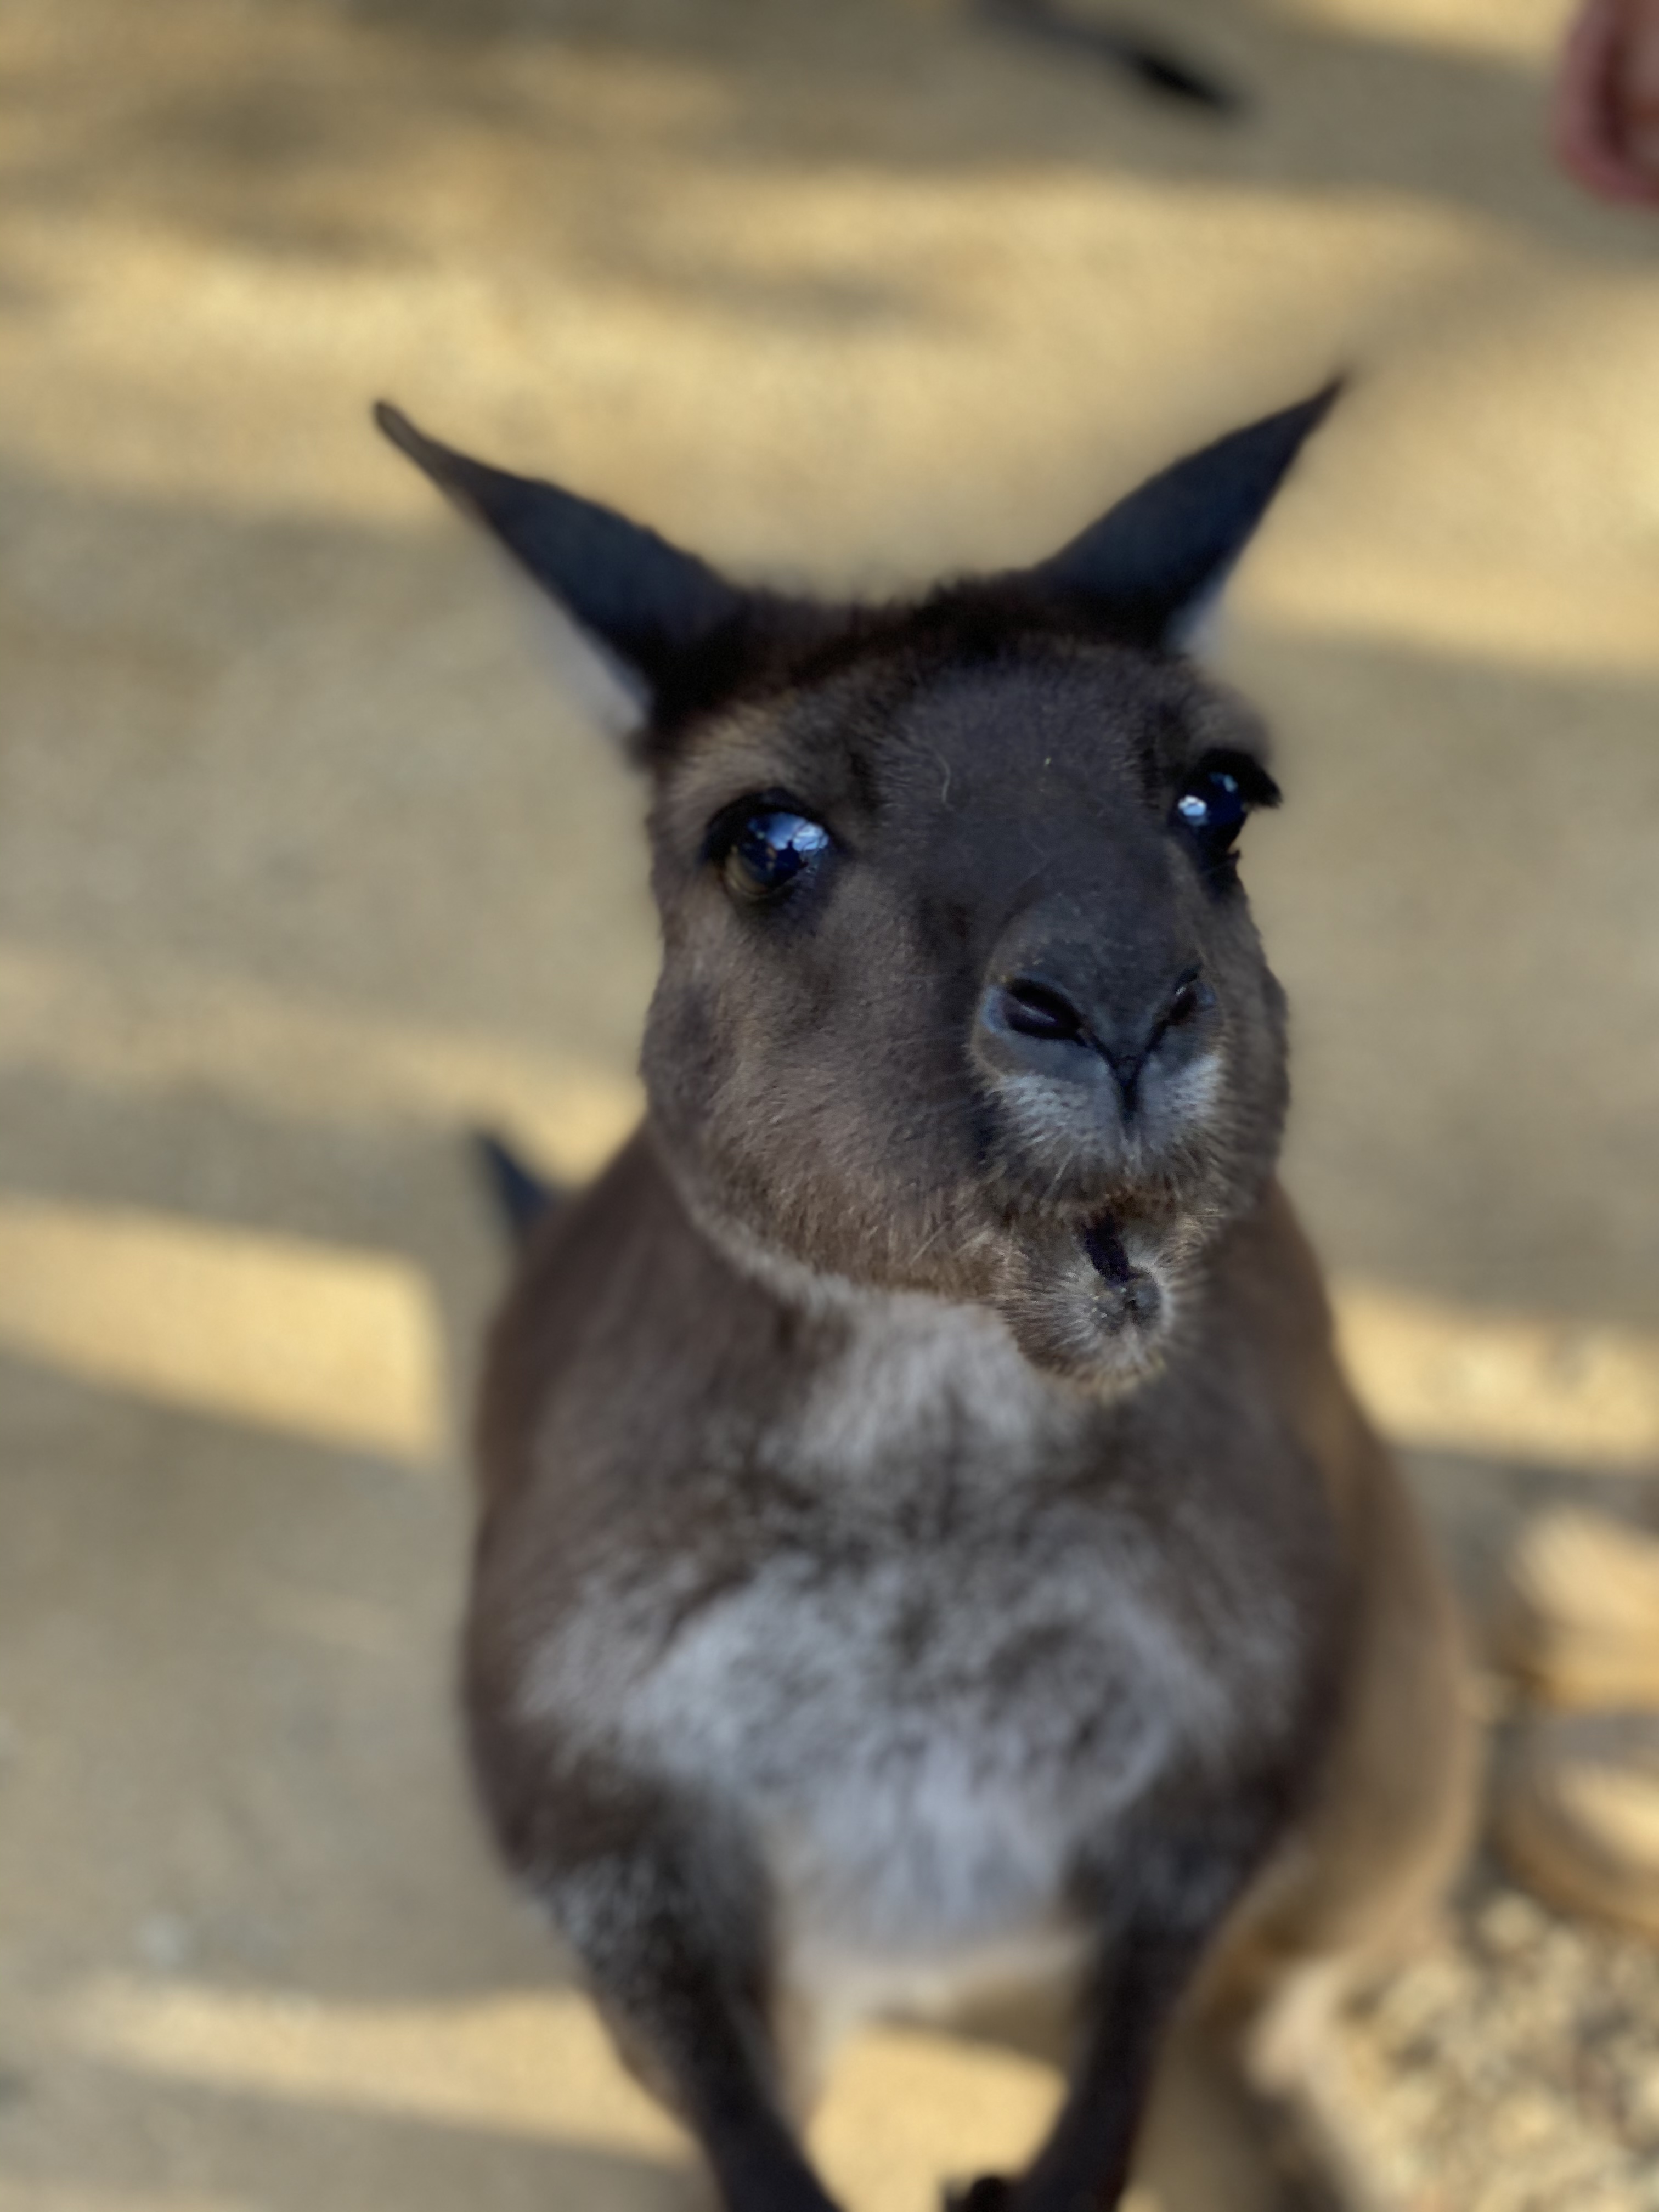 Facts About Kangaroos | WILD LIFE Sydney Zoo